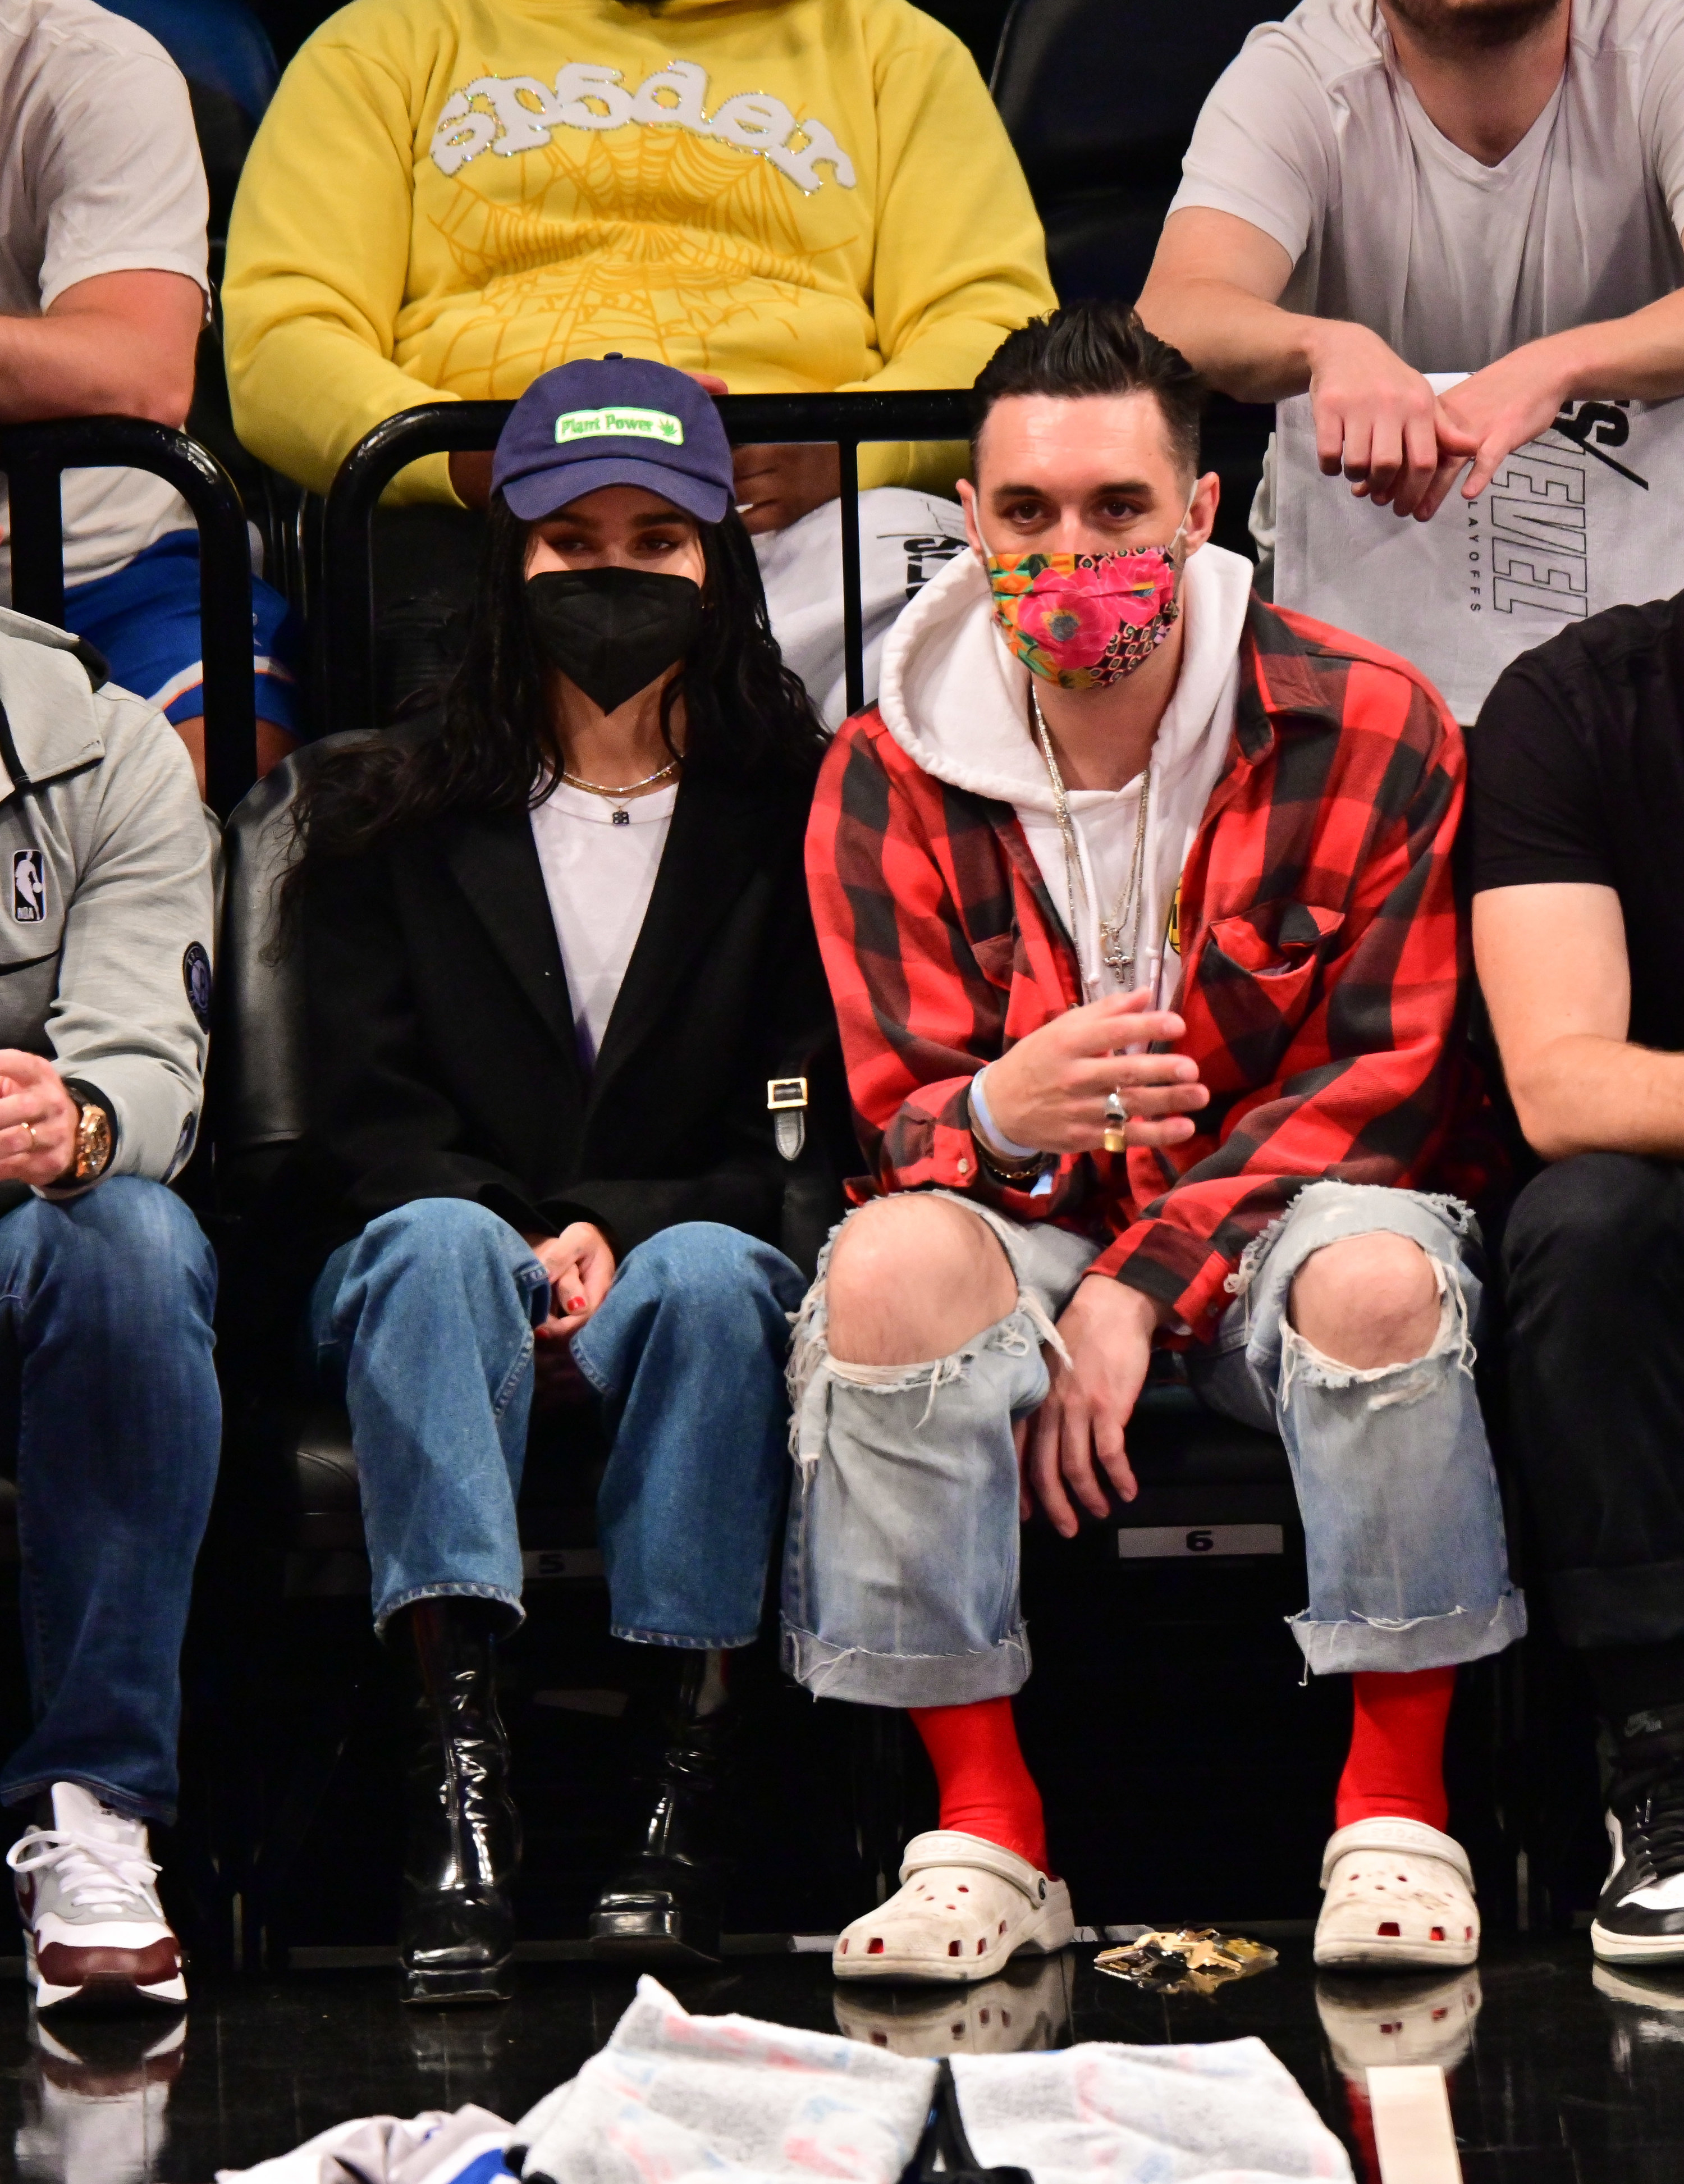 Zoe sitting courtside in jeans boots t-shirt cardi hat and mask